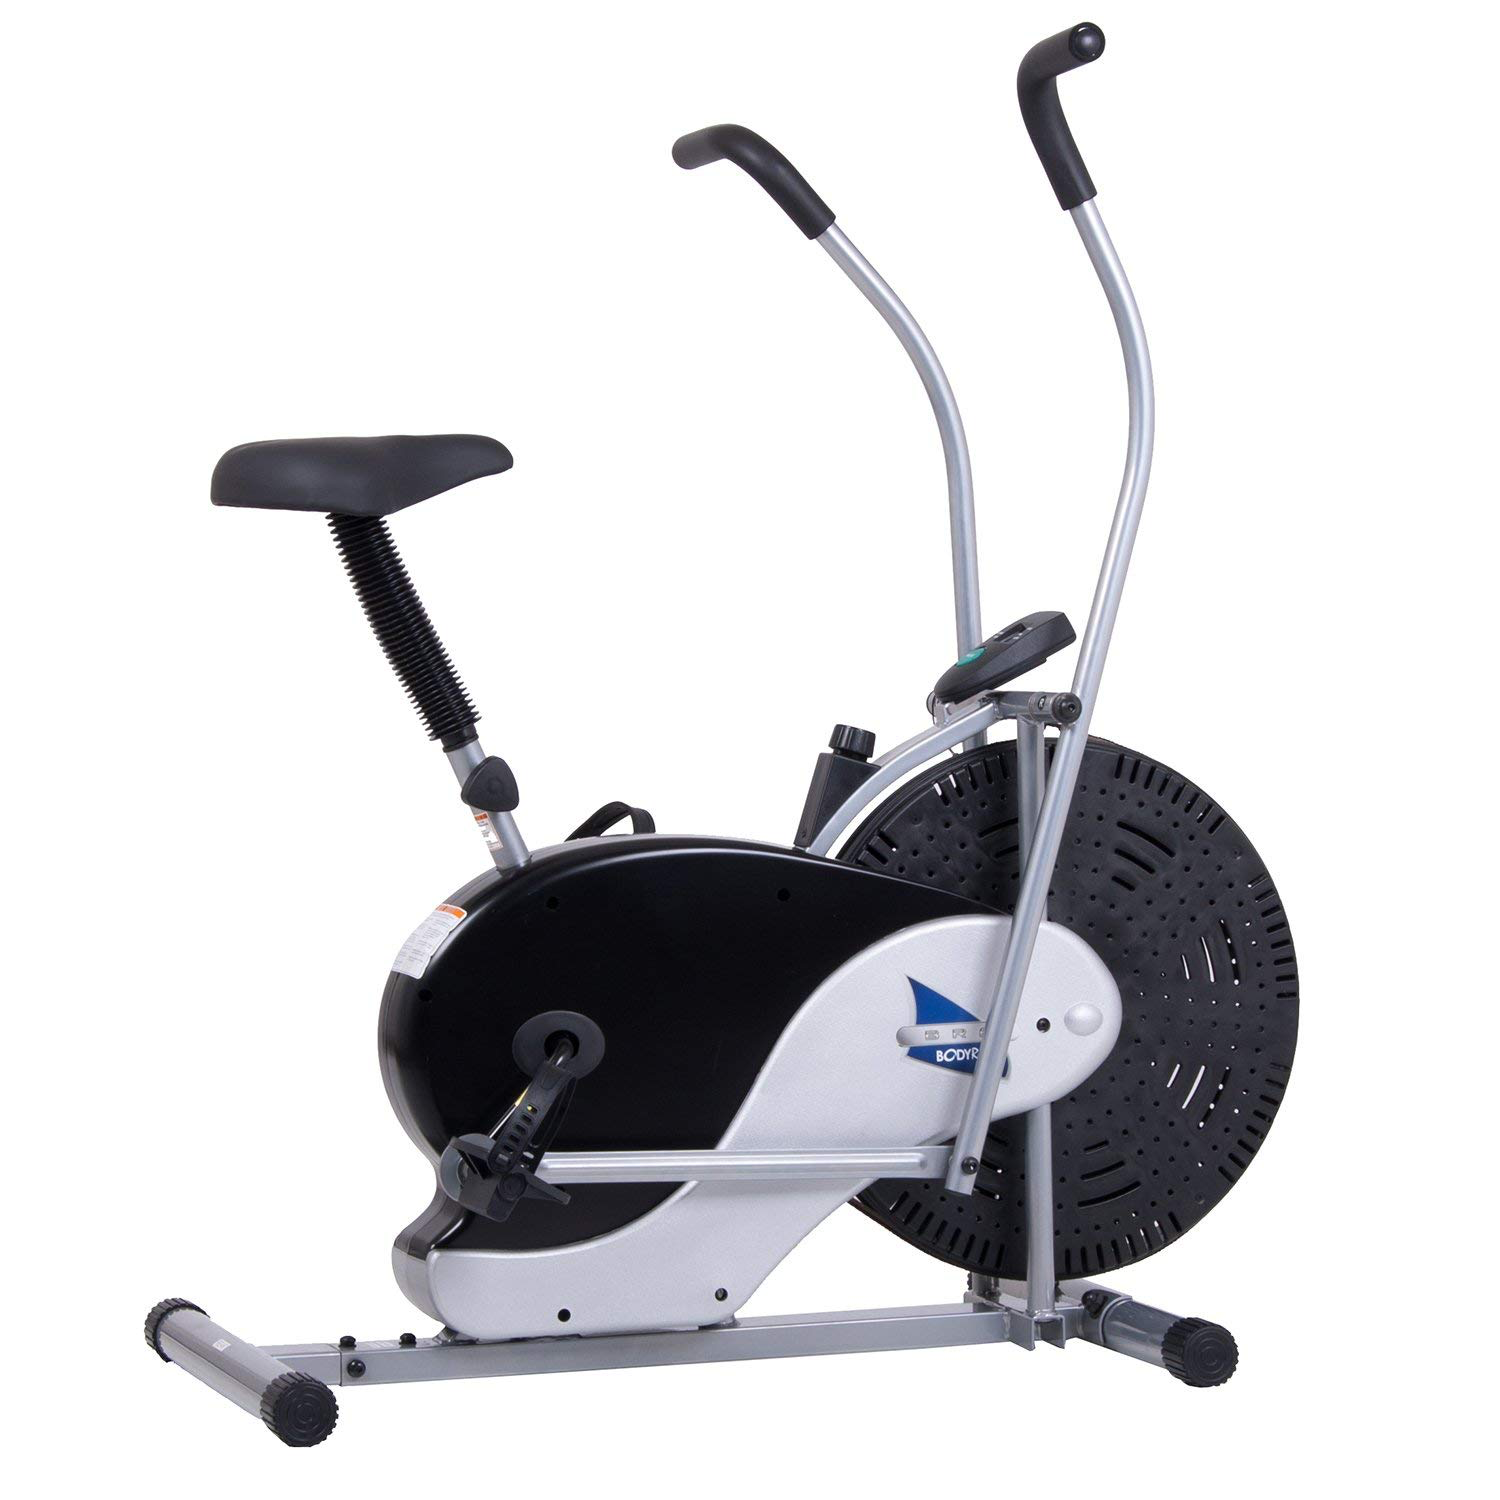 Best Exercise Bikes for Home